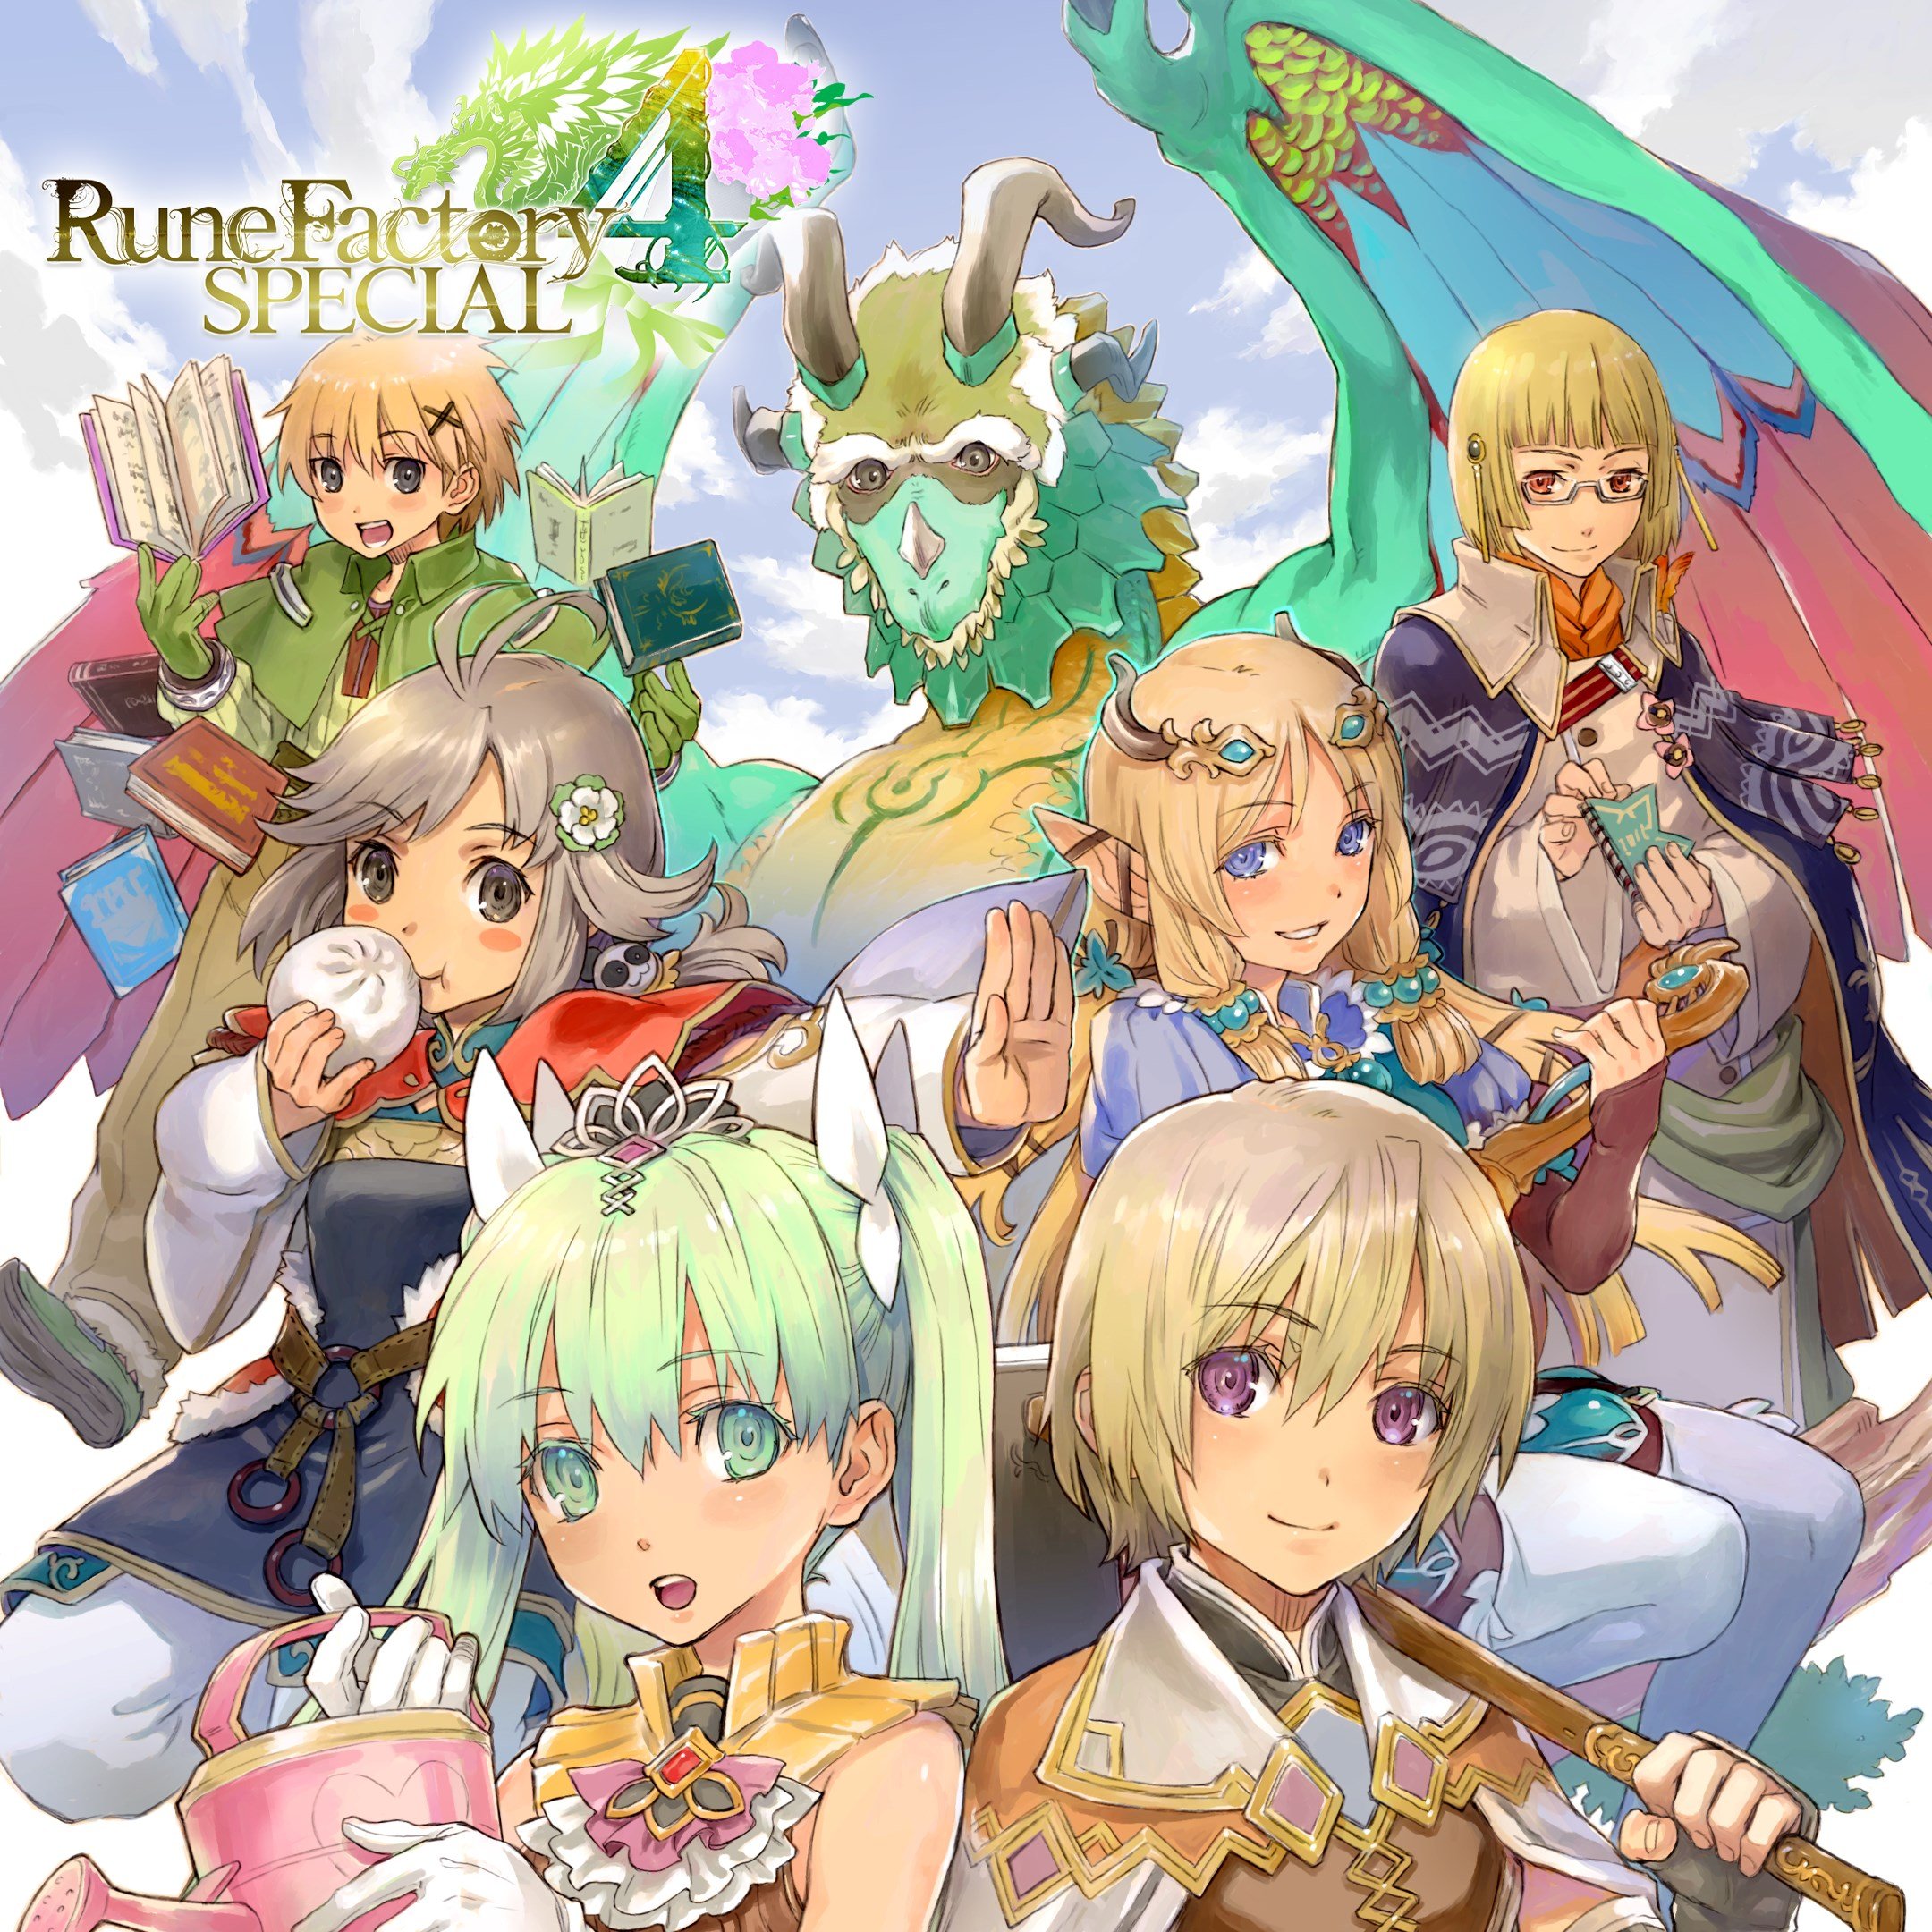 Boxart for Rune Factory 4 Special